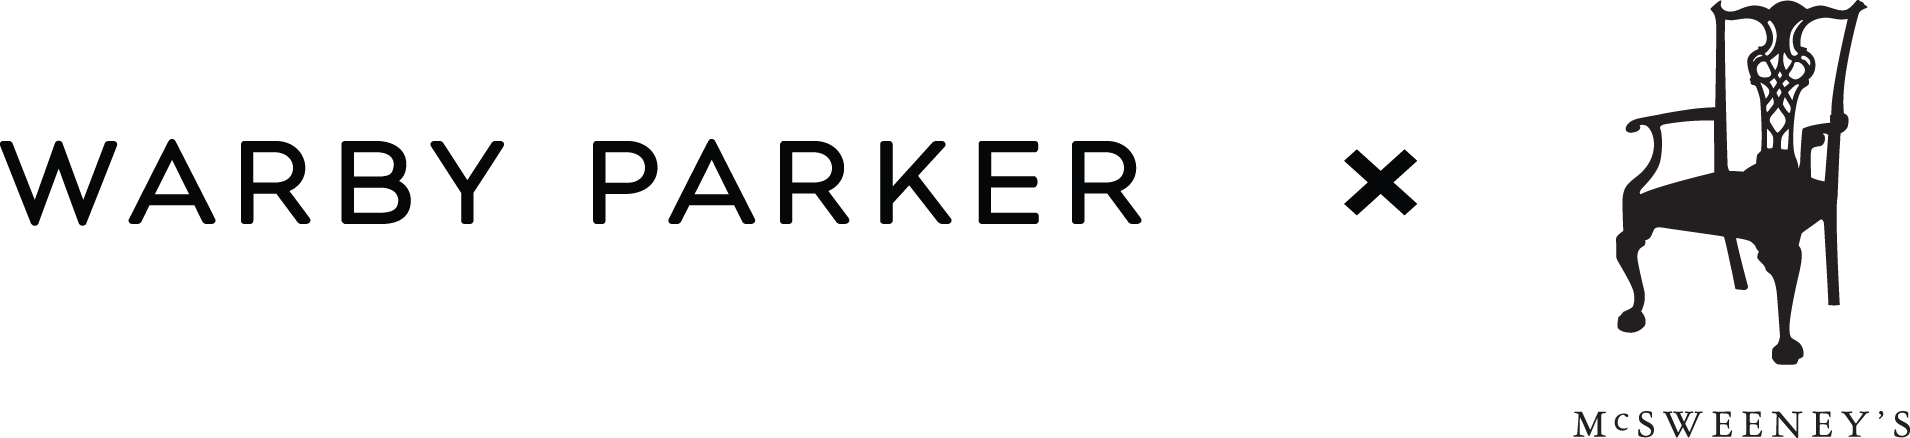 Warby Parker Logo - Warby parker Logos